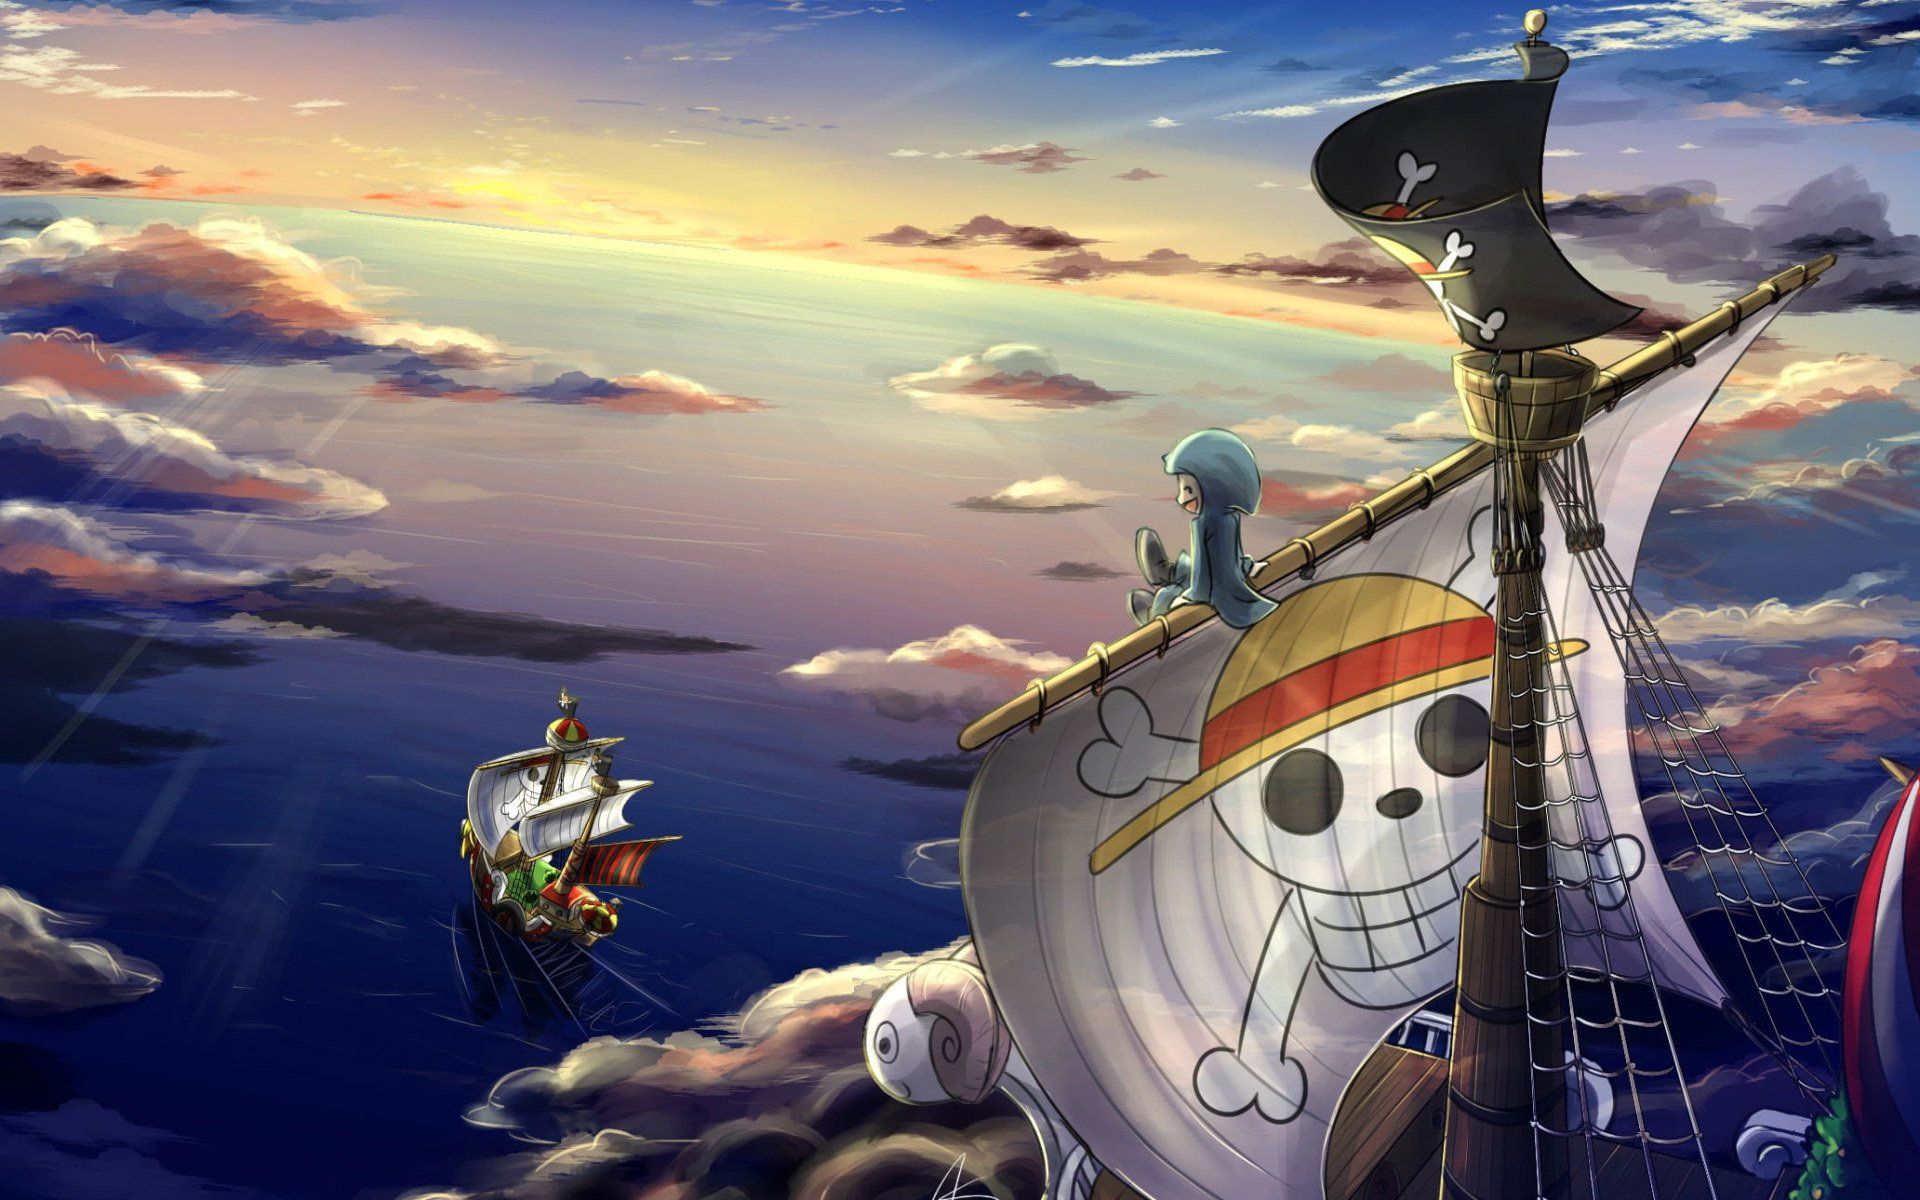 One Piece wallpaper, Going Merry (One Piece), Sunny (One Piece), Thousand Sunny • Wallpaper For You HD Wallpaper For Desktop & Mobile